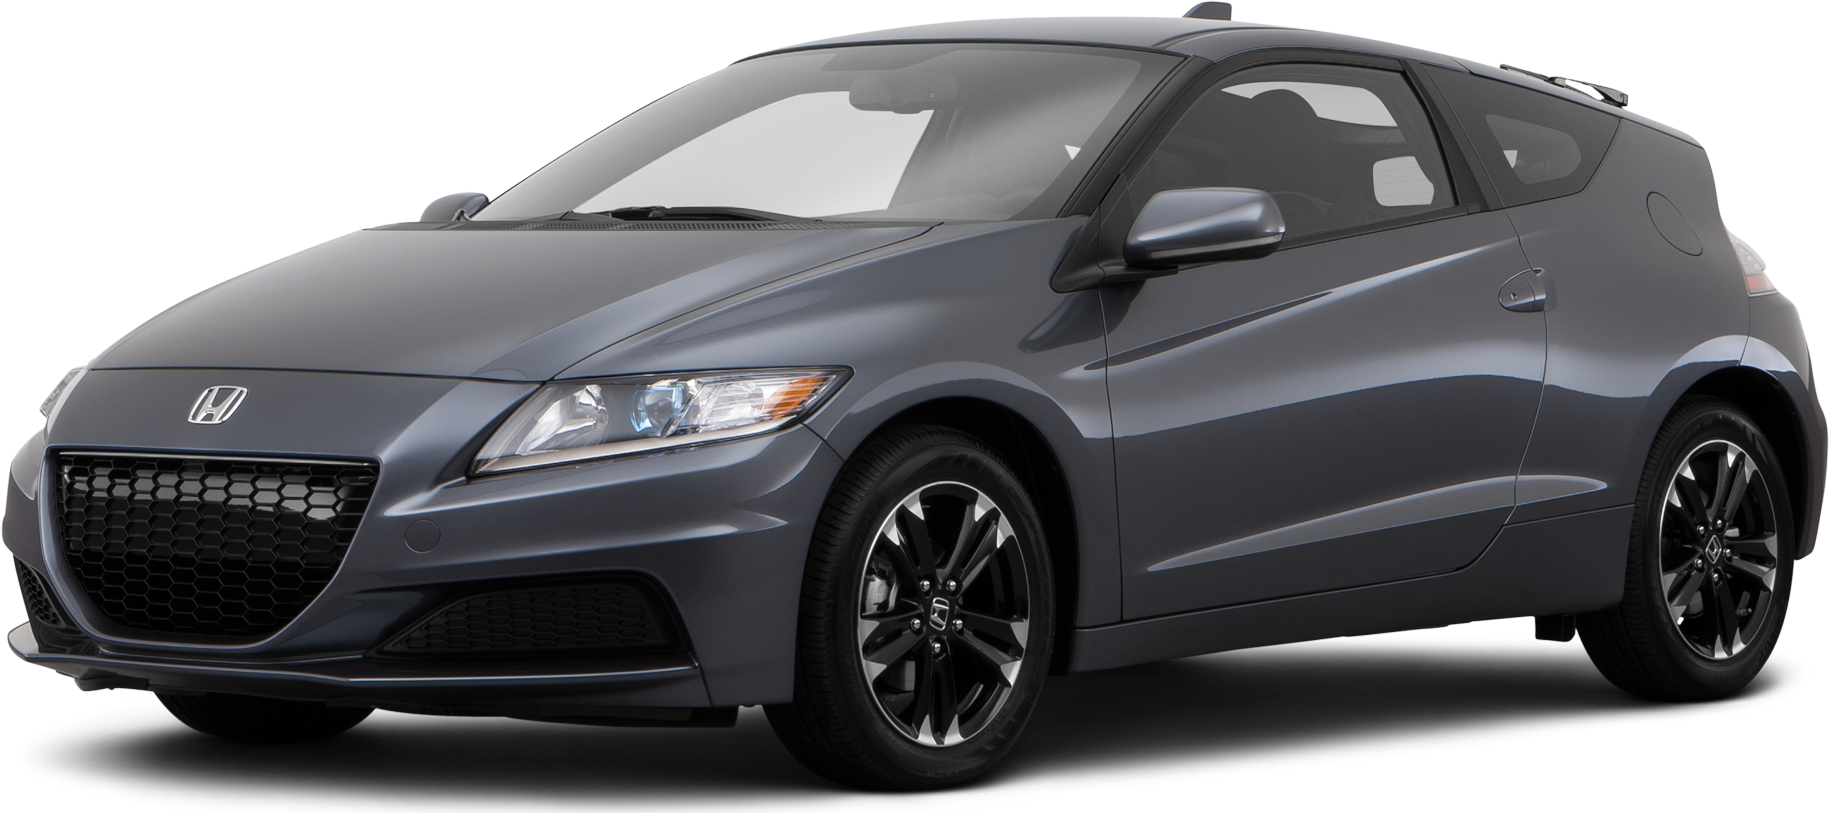 Not All See the CR-X in Honda's CR-Z